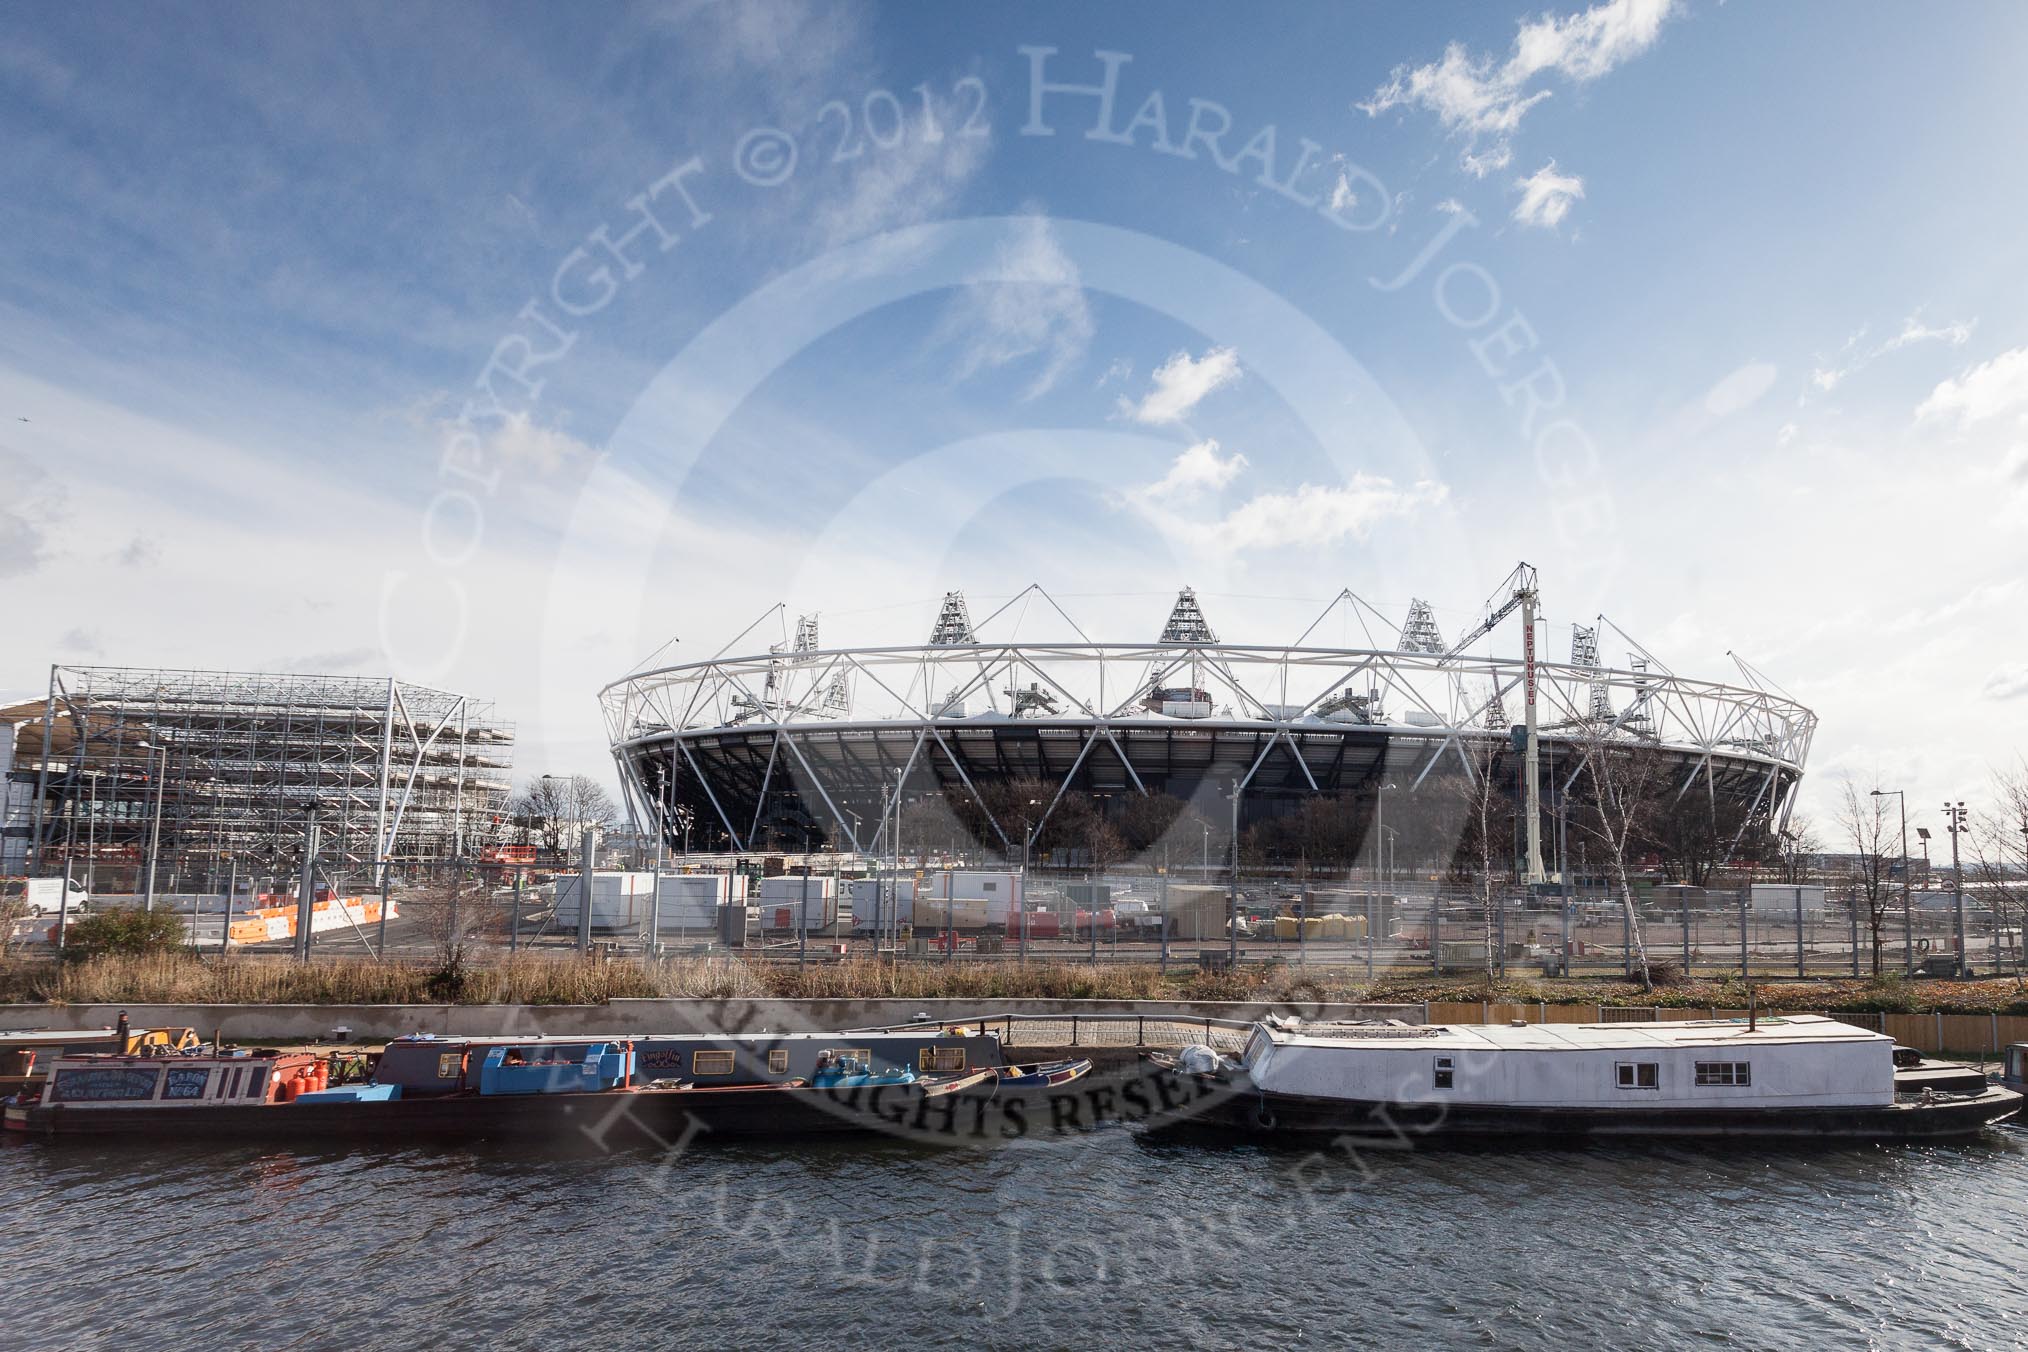 The Boat Race season 2012 - Crew Announcement and Weigh In: The River Stoar seen from Forman's Fish Island. Behind the moored narrowboats the Olympic Park, with the Olympic Stadium on the right..
Forman's Fish Island,
London E3,

United Kingdom,
on 05 March 2012 at 10:44, image #60